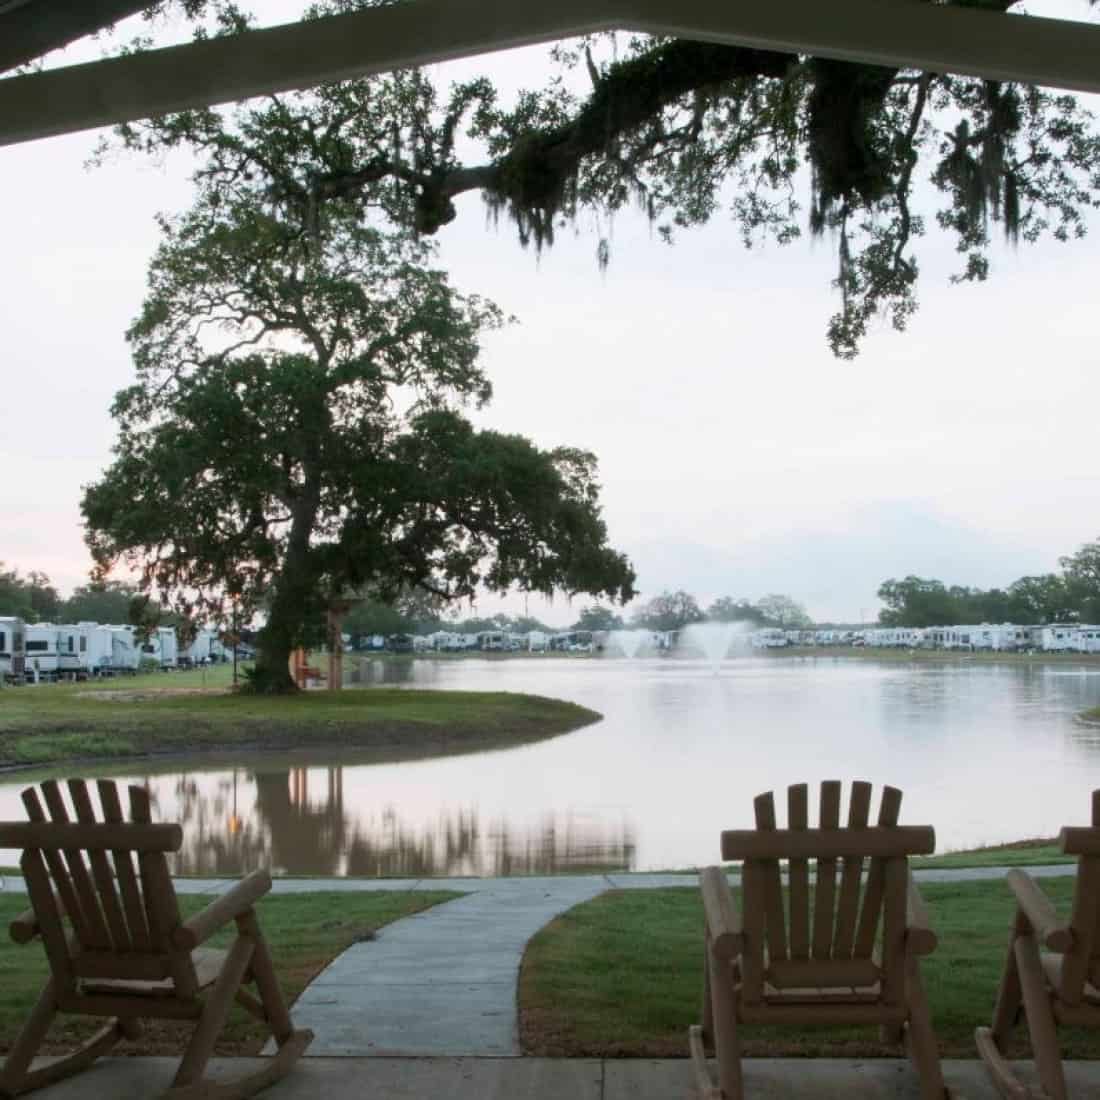 Rocking chairs facing a serene lake with fountains at Brazoria Lakes RV Resort, flanked by RVs and lush trees.